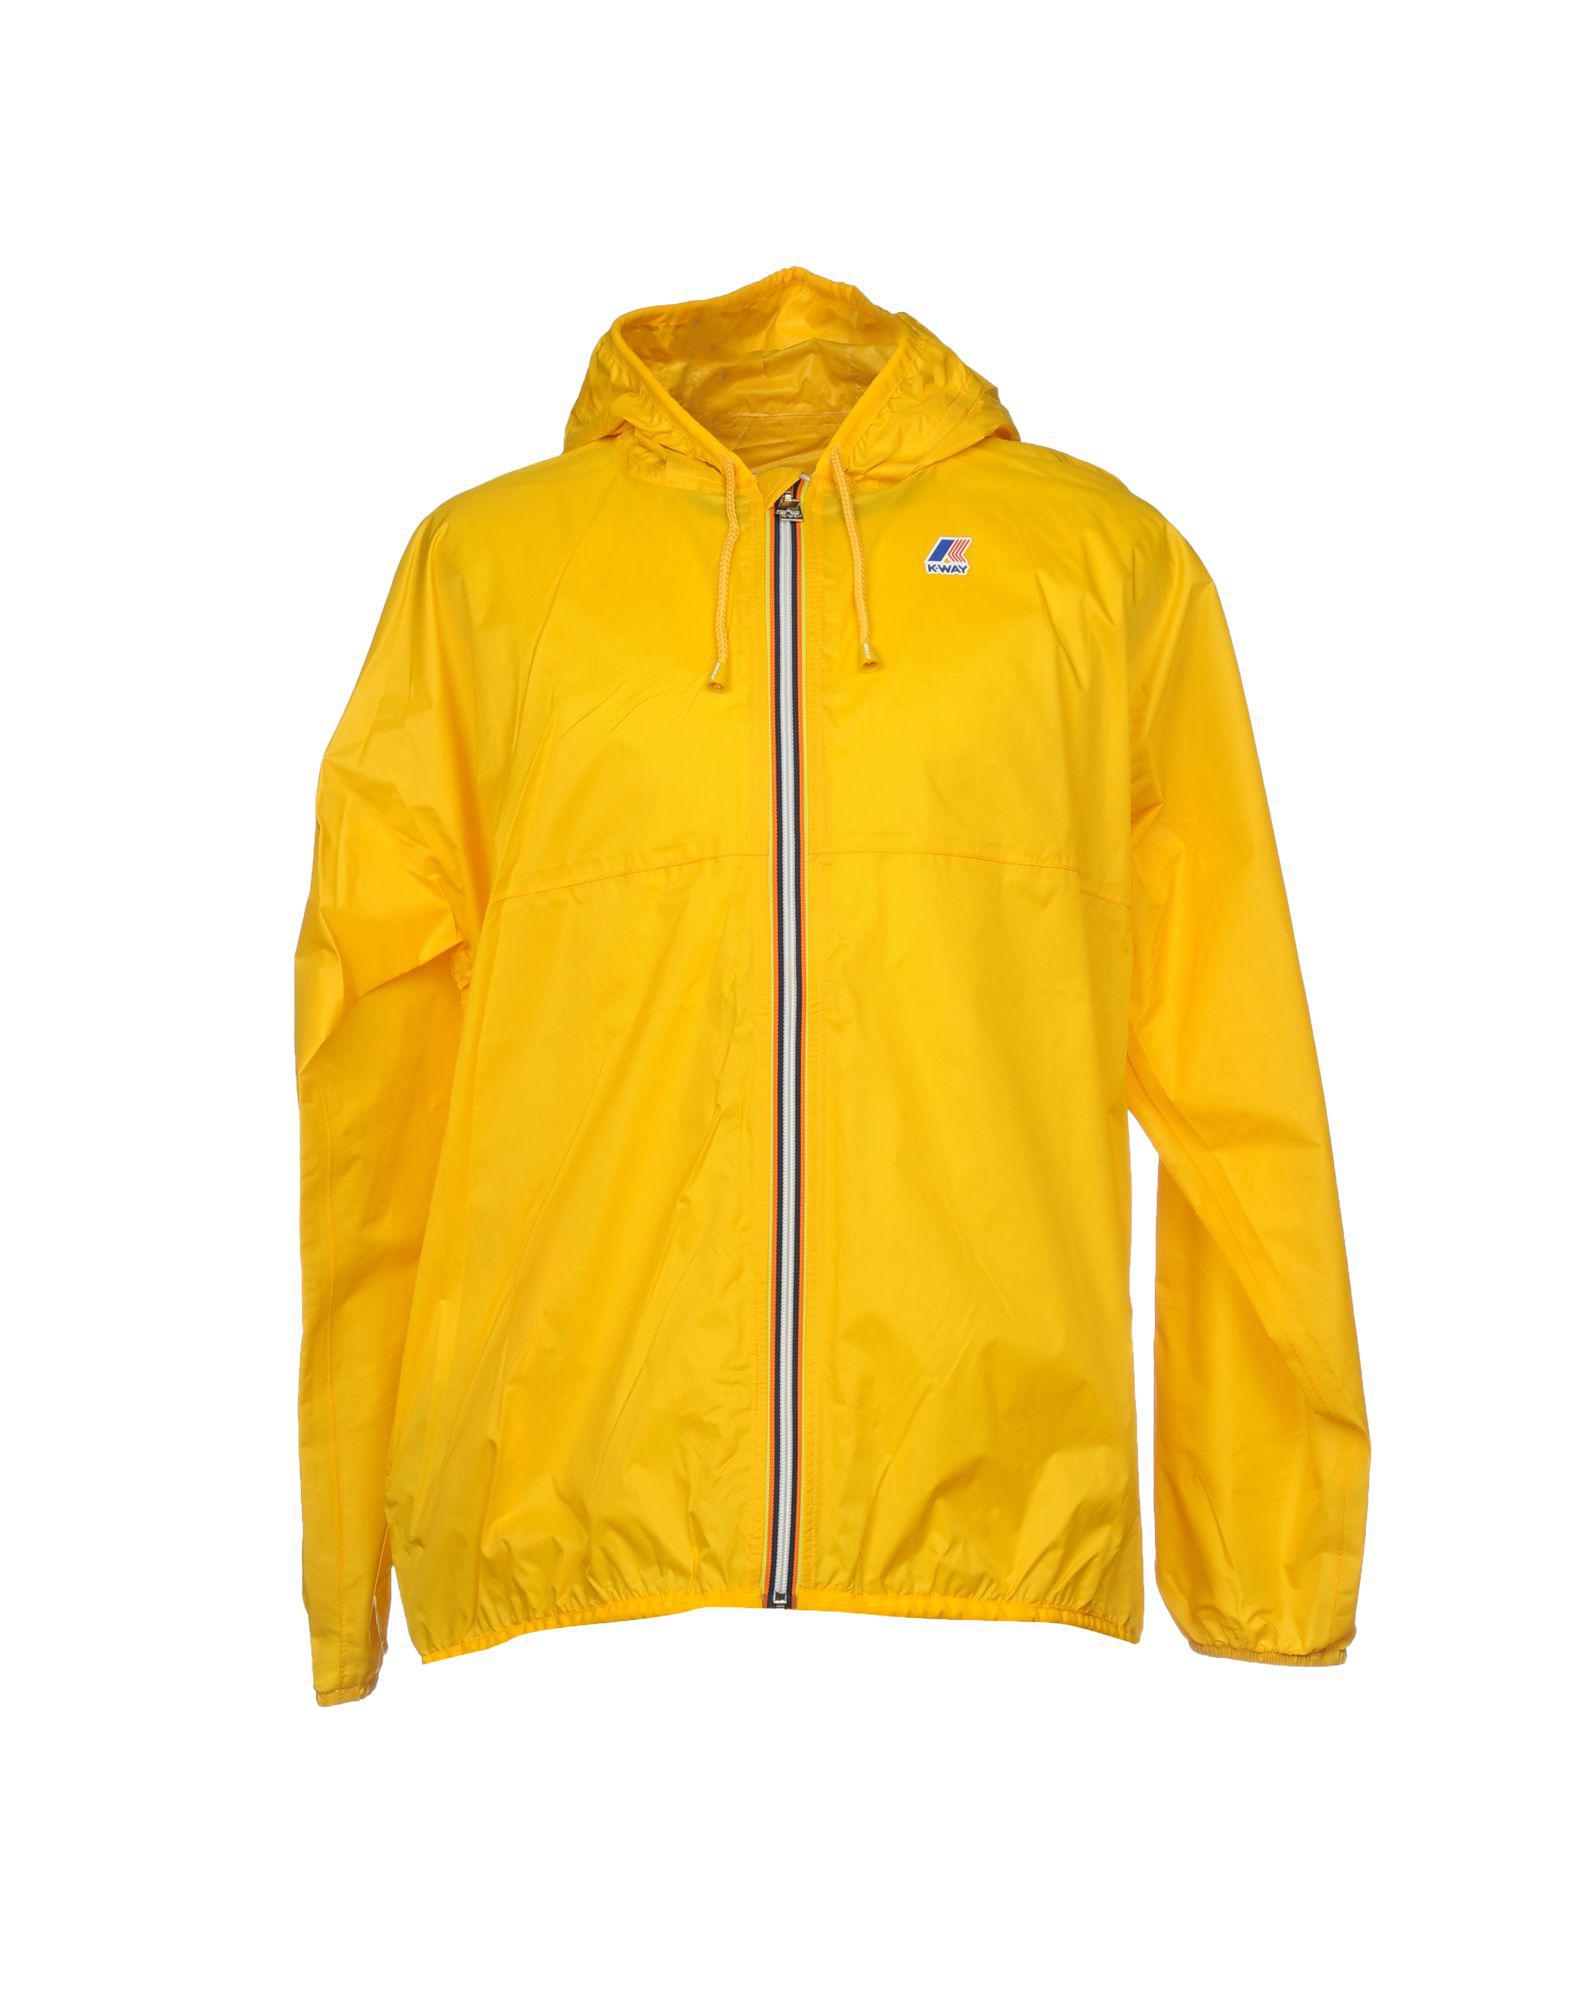 Lyst - K-Way Jacket in Yellow for Men - Save 77.29257641921397%